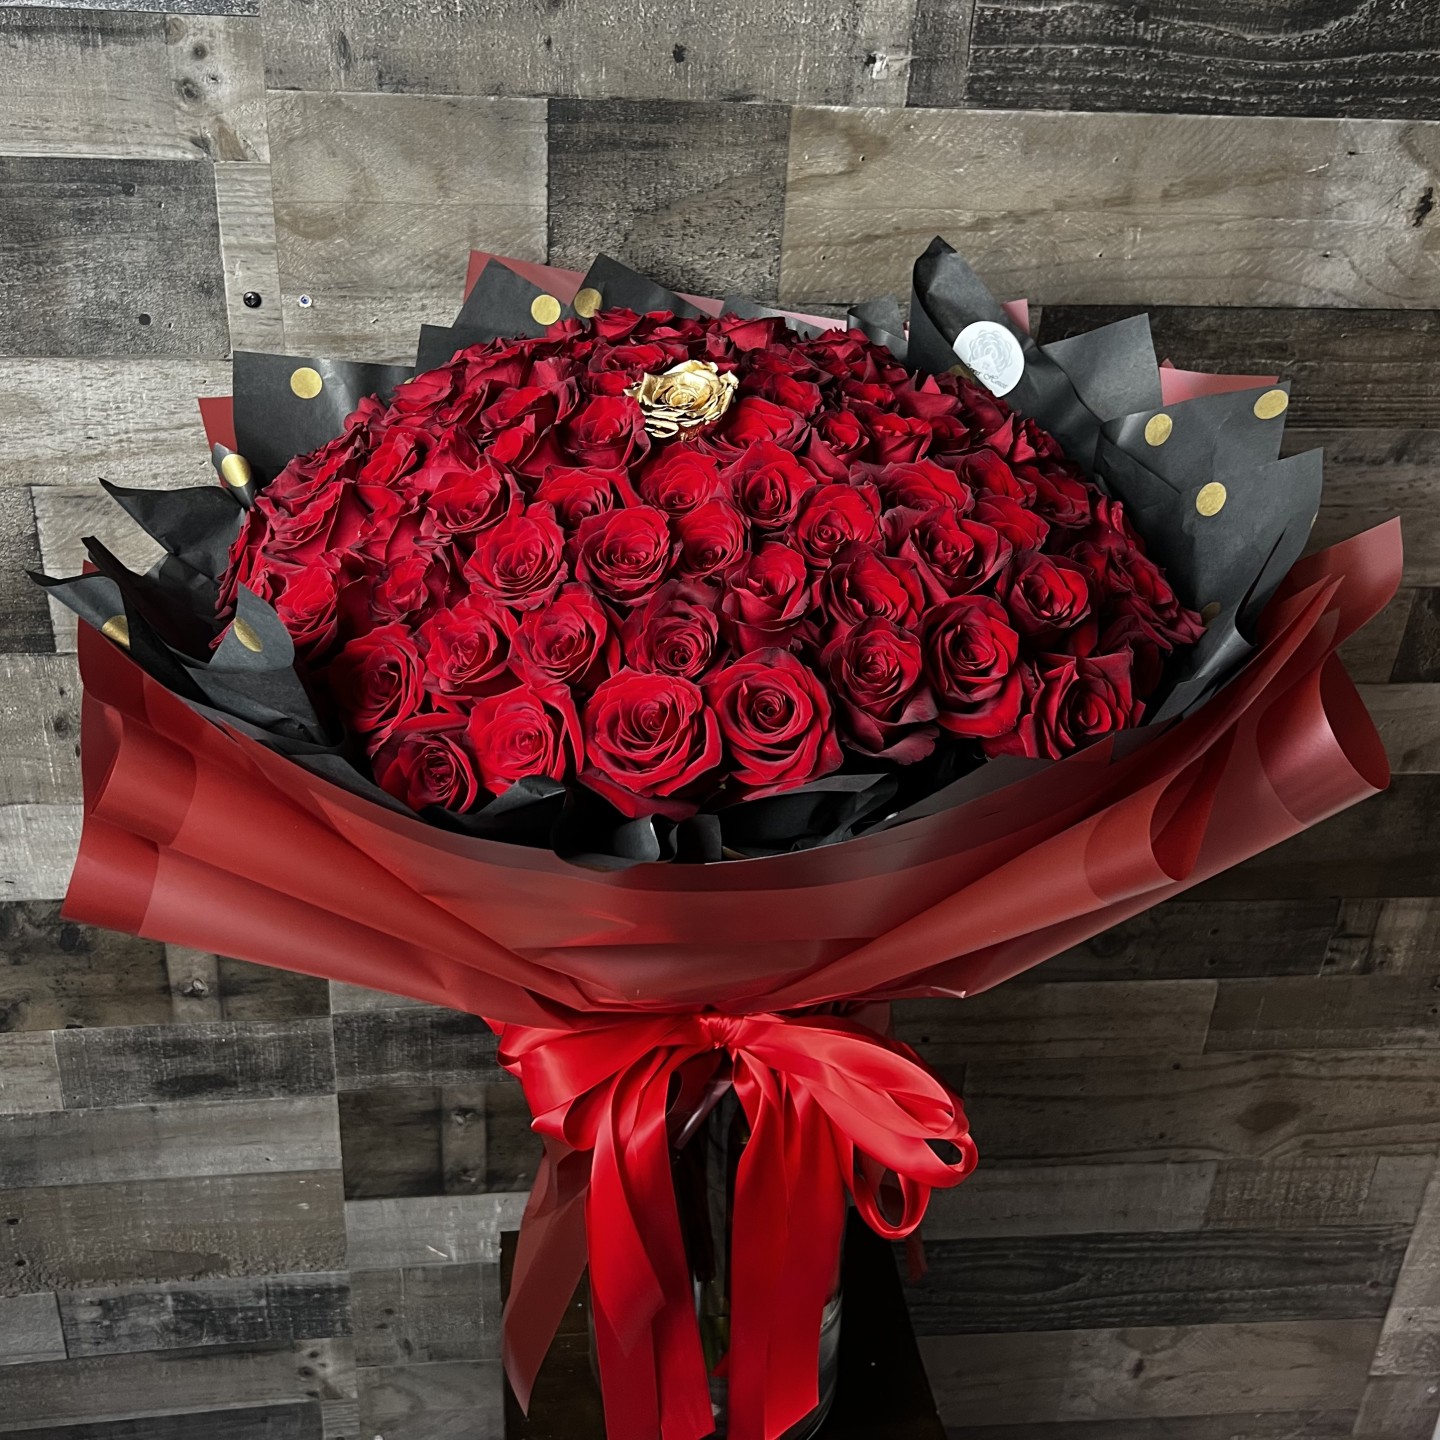 100 Red Roses With 1 Gold Rose In The Middle Hand-Tied Bouquet